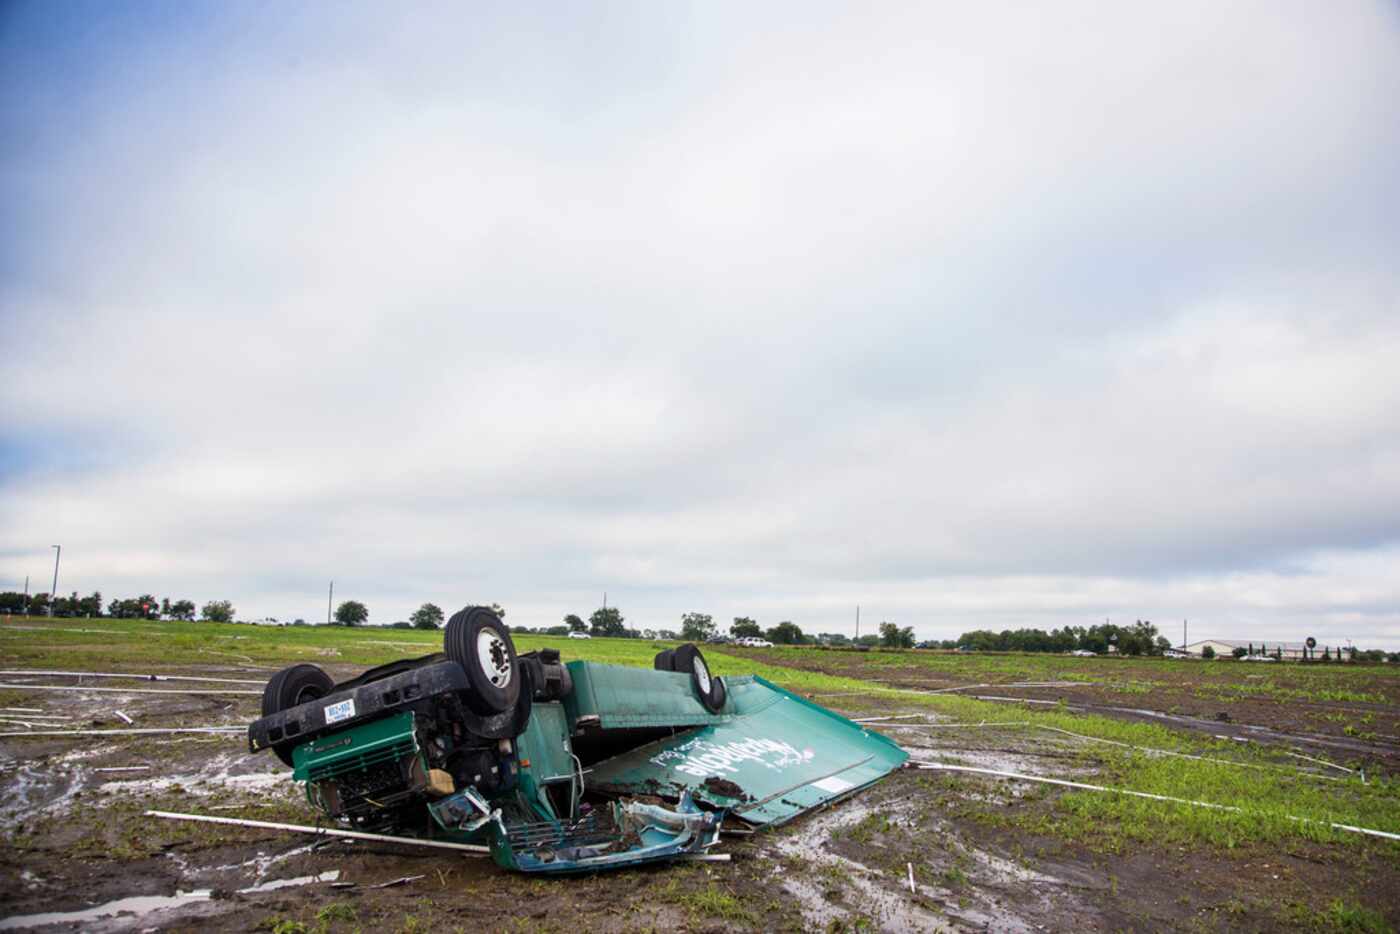 High winds rolled the "Spirit of Waxahachie Indian Band" bus into an empty field beside...